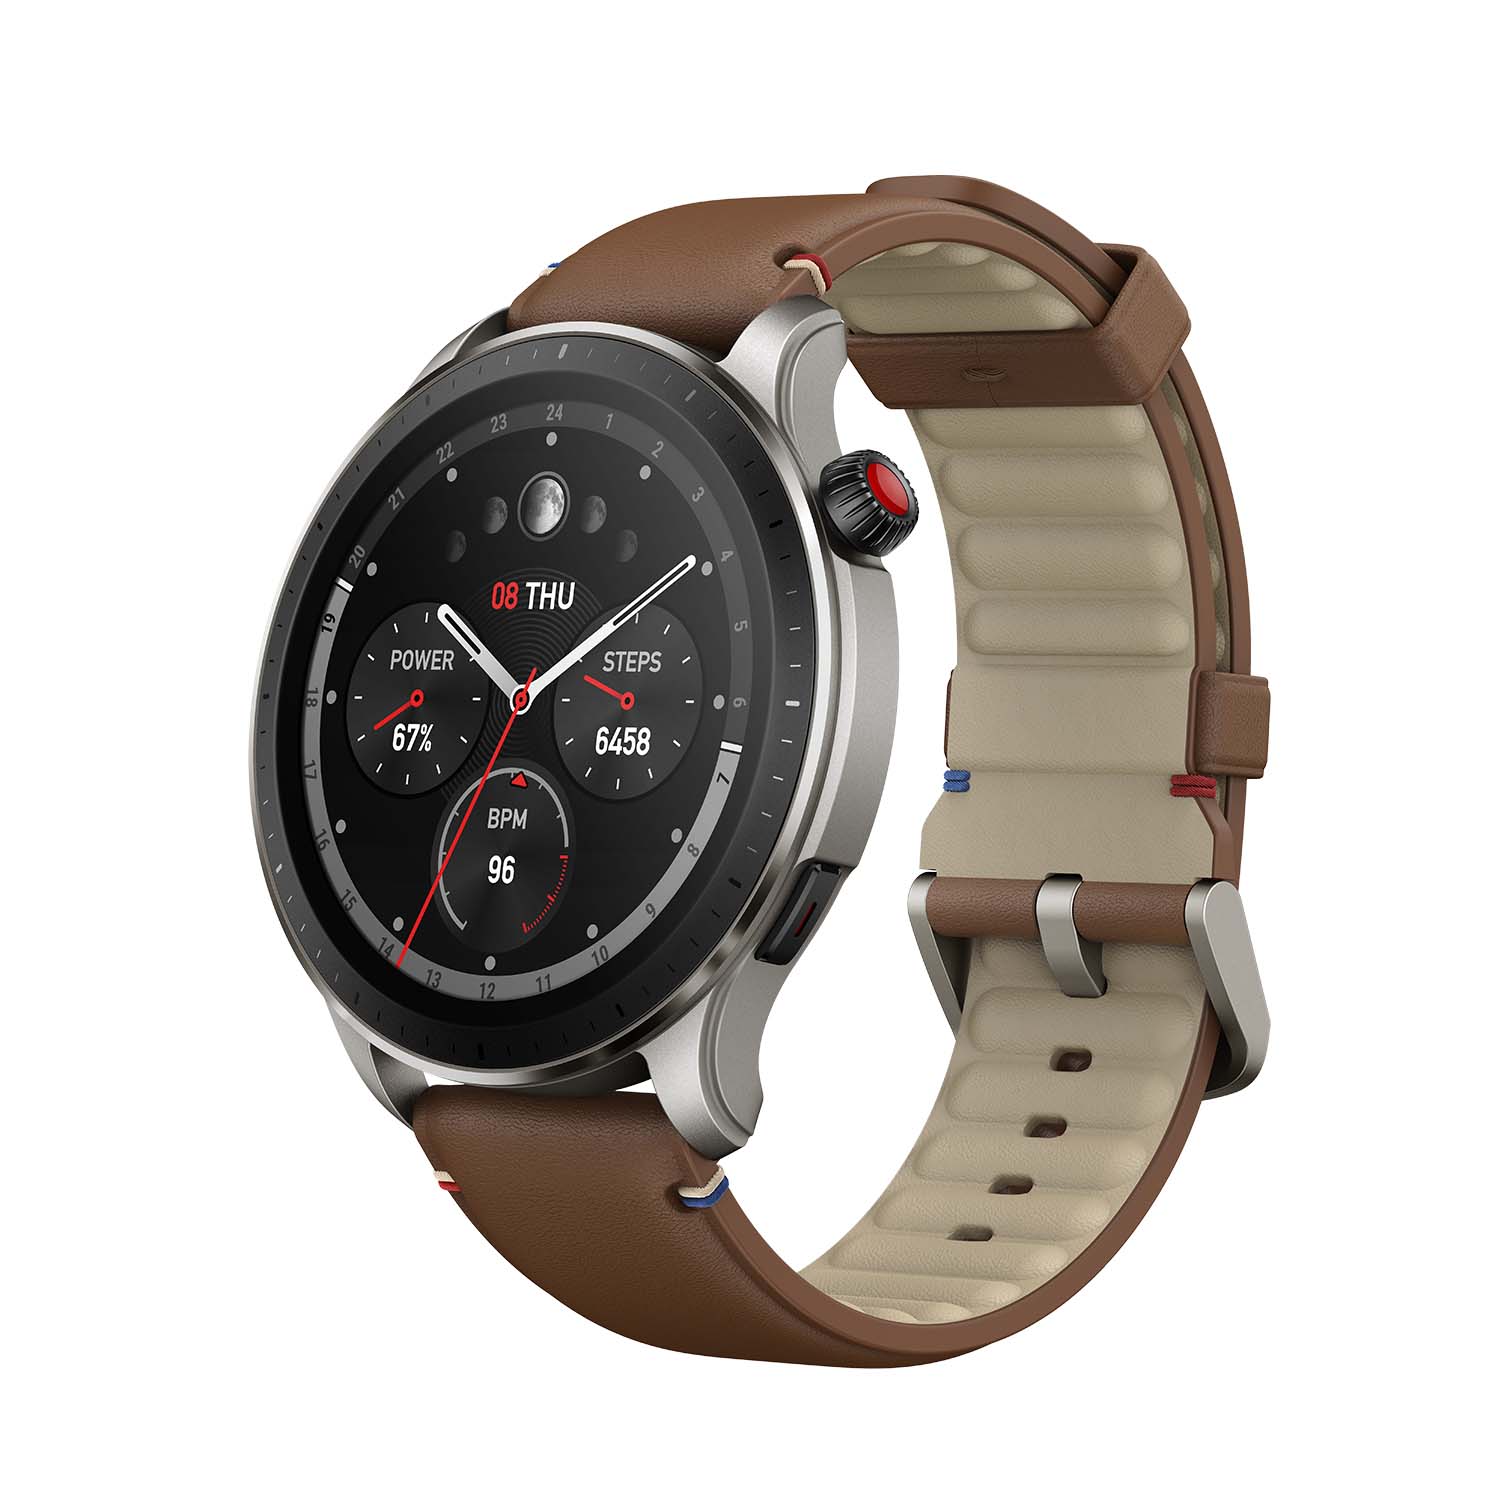 Amazfit GTS 4 Full Smartwatch Specifications and Features